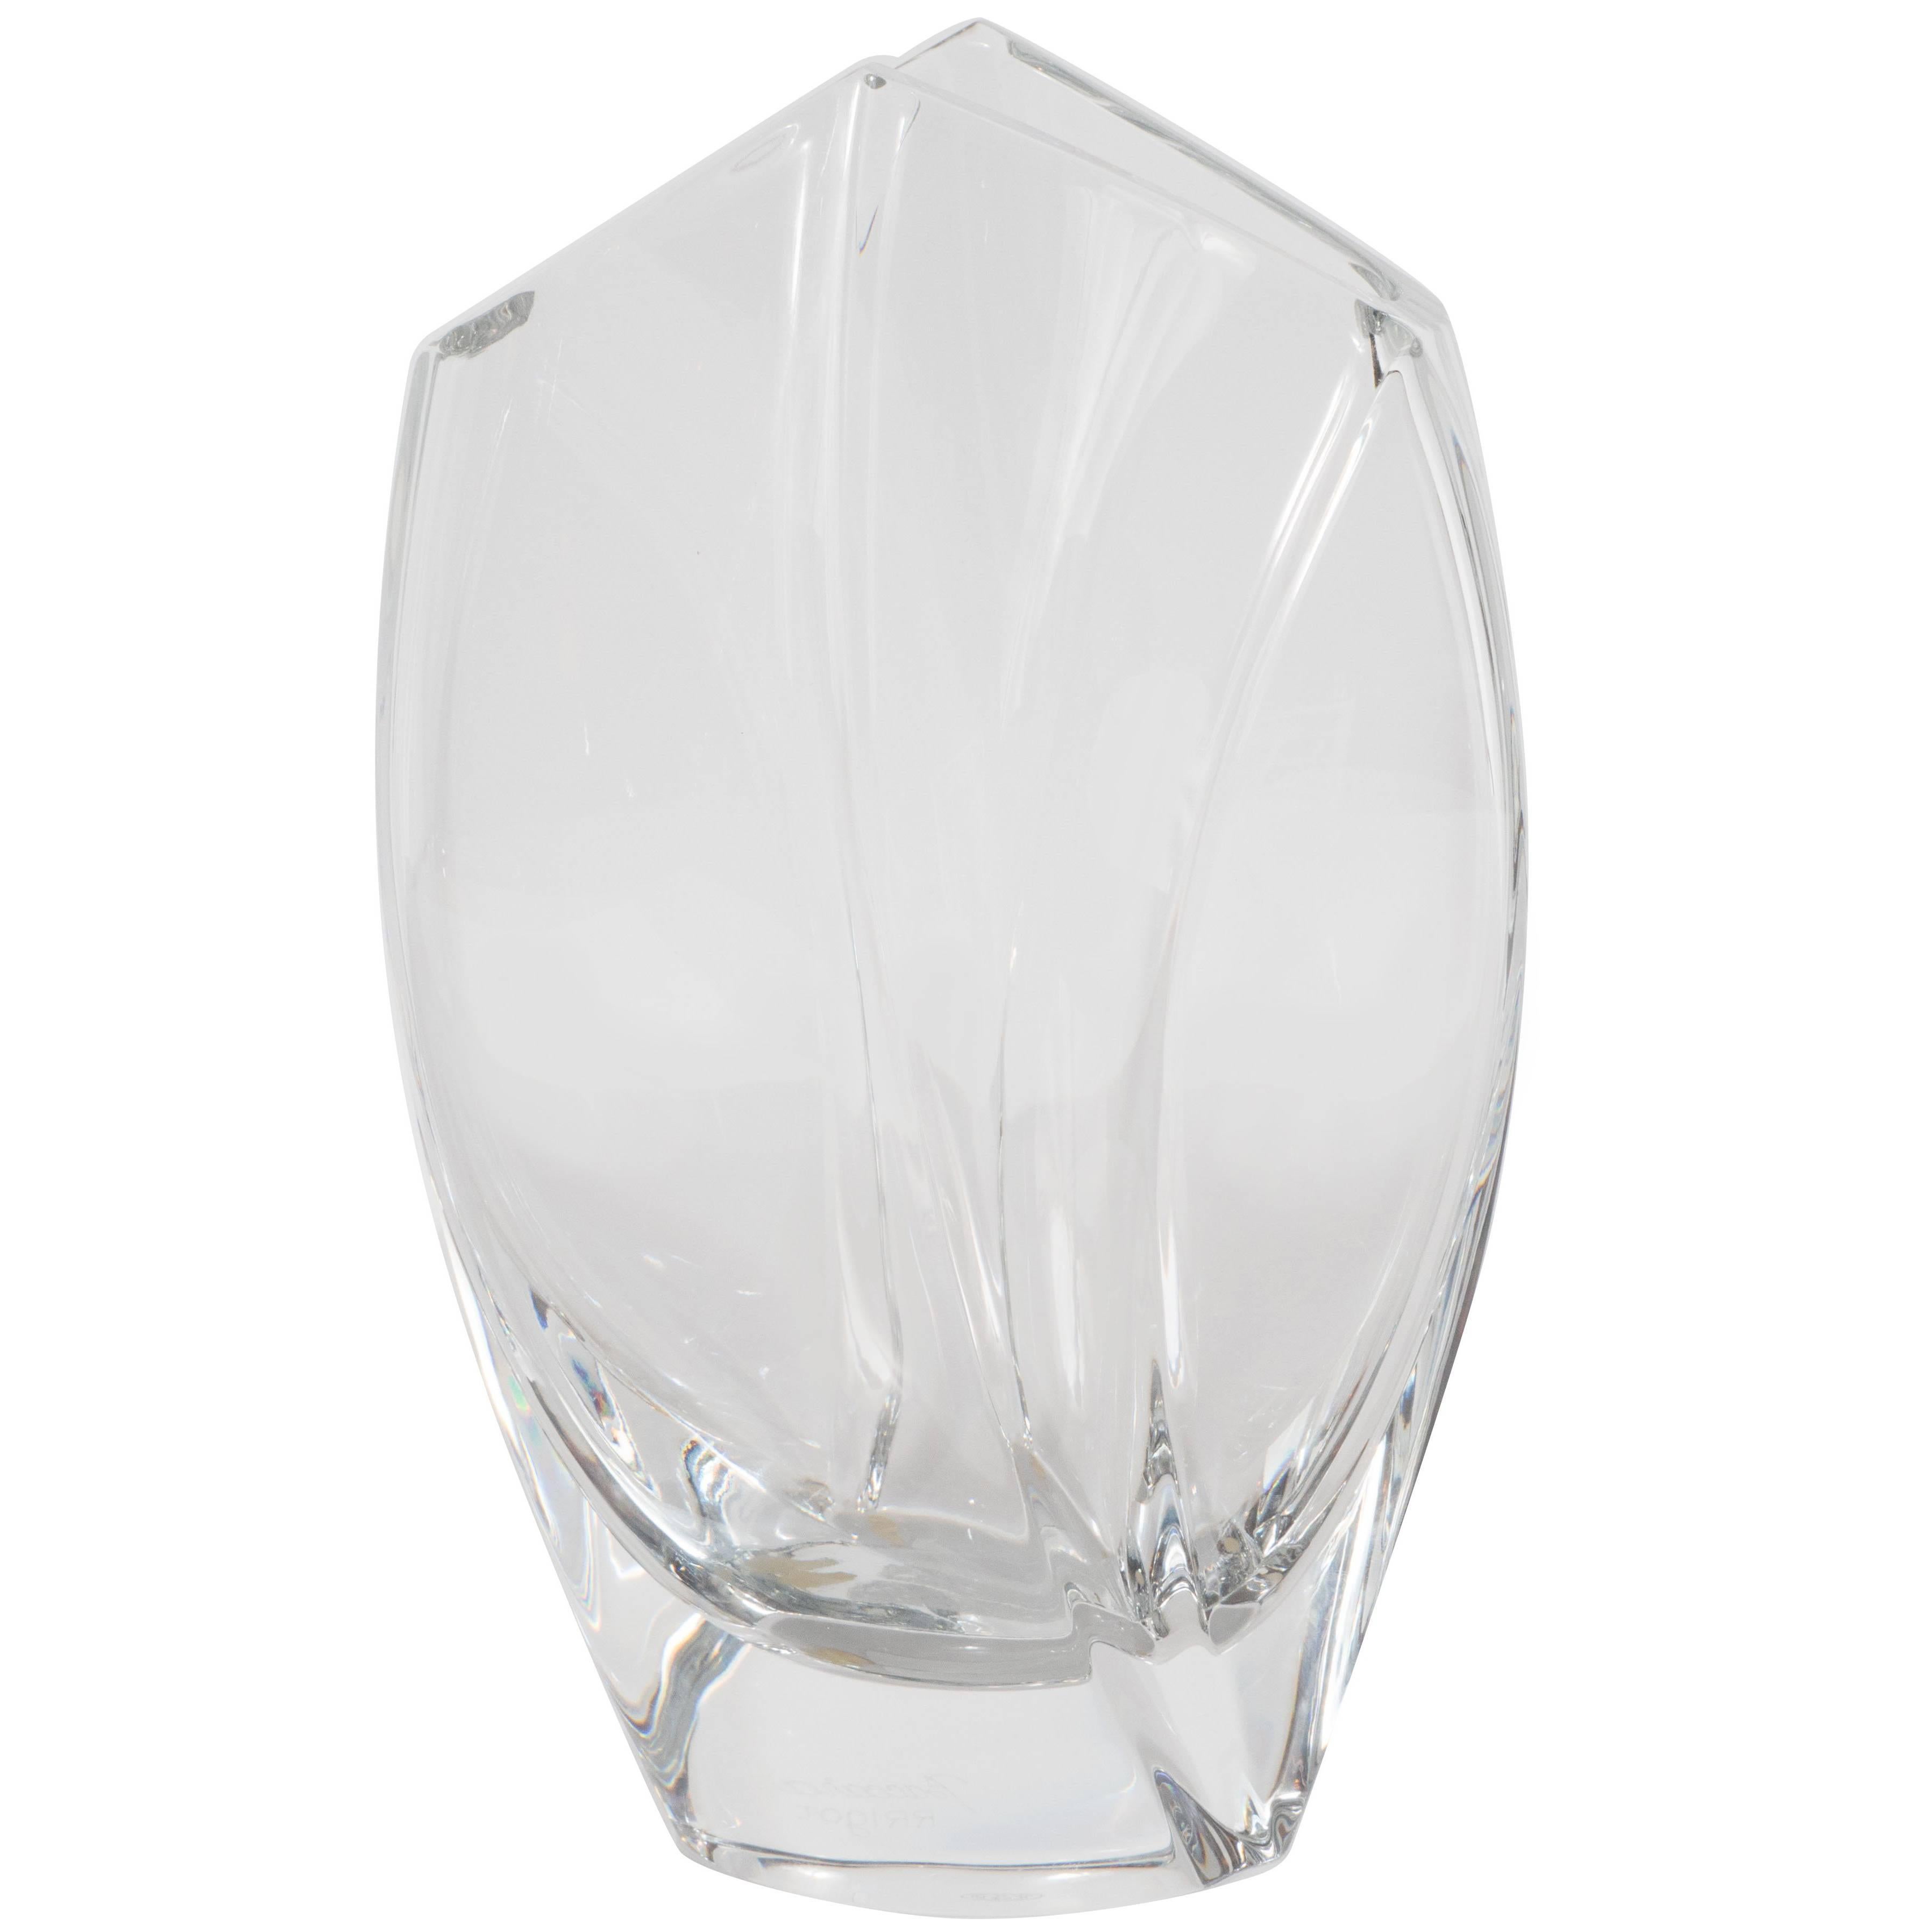 Mid-Century Modern Hexagonal Translucent Glass Vase by Baccarat of France